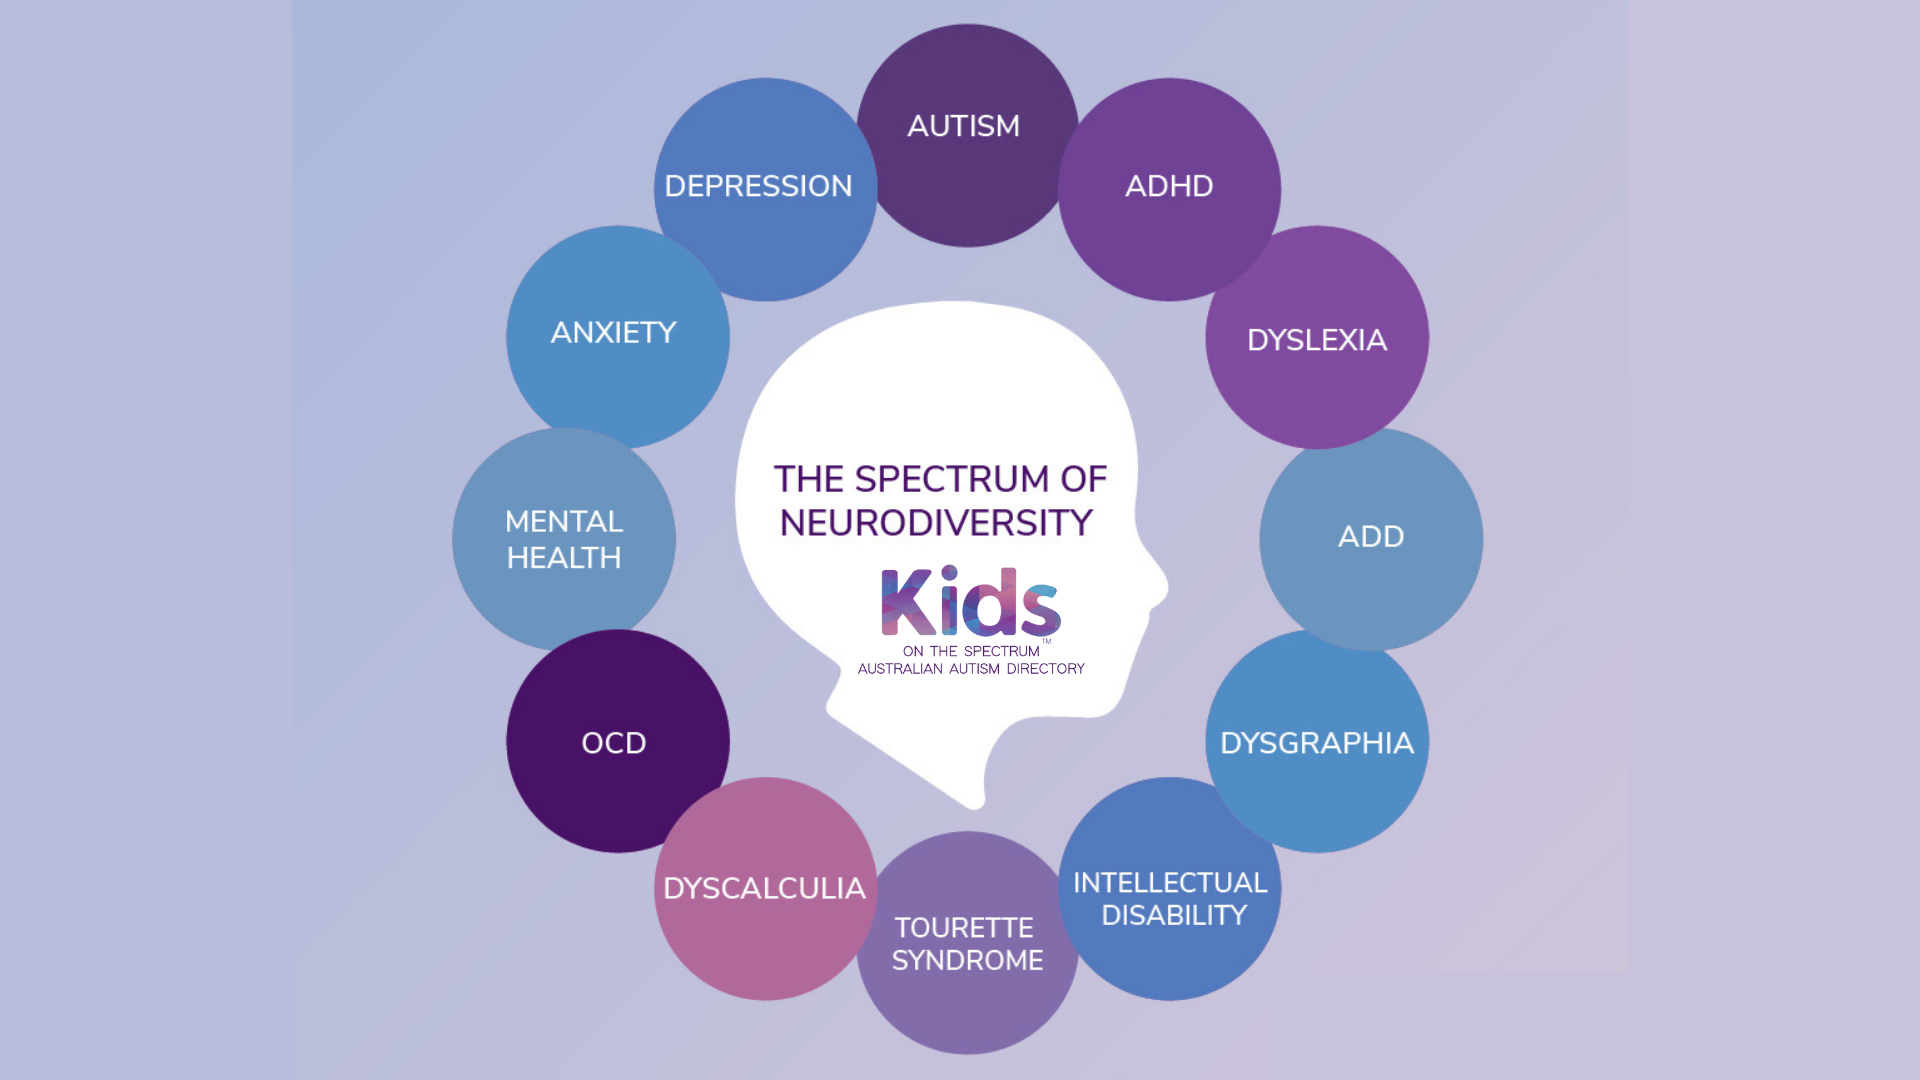 The Spectrum of Neurodiversity – The meaning.